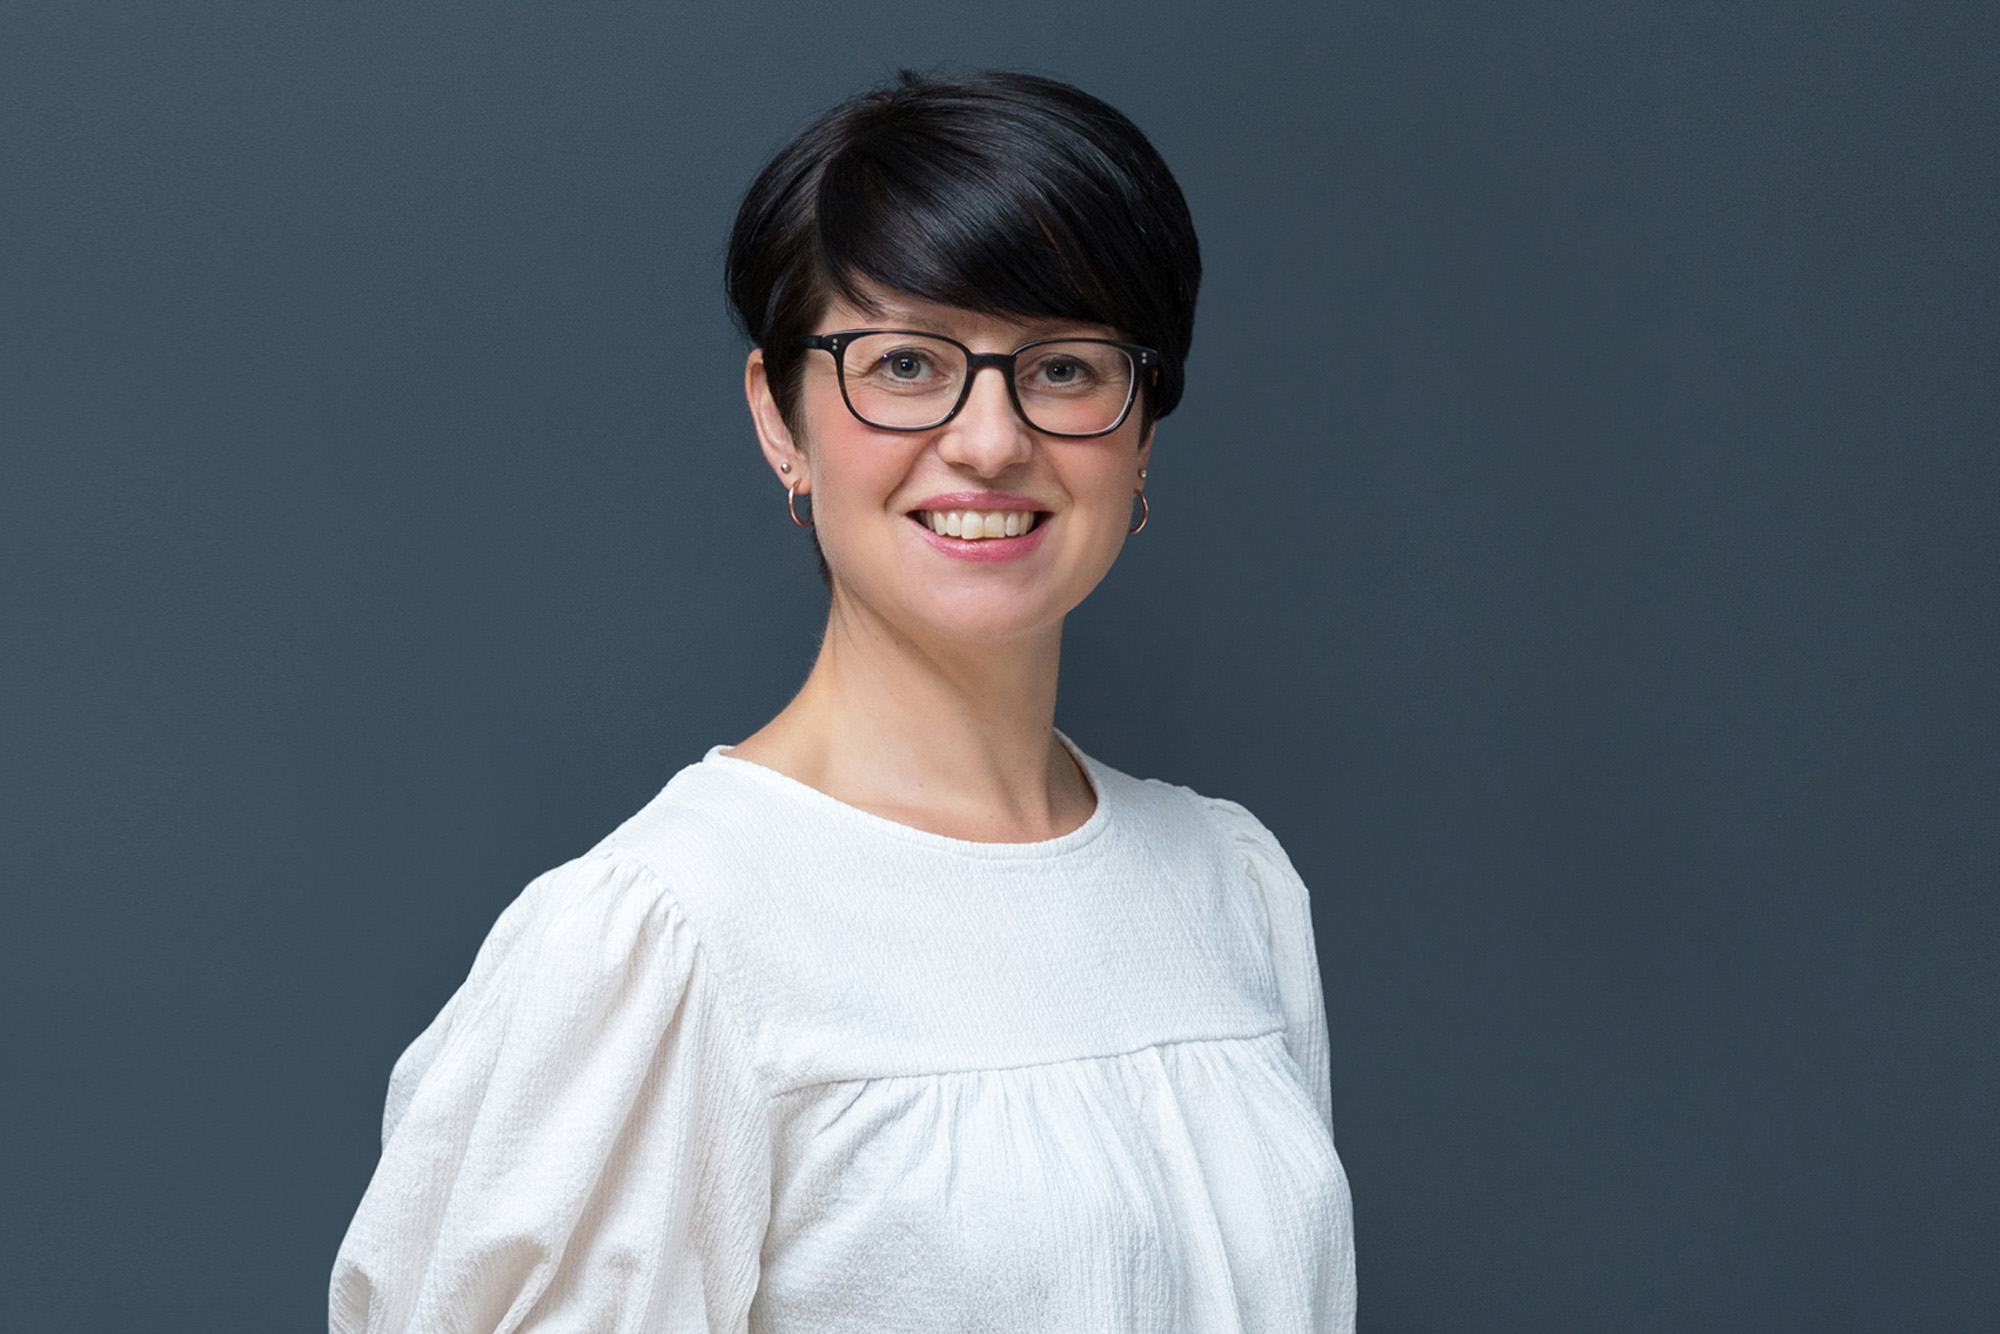 A corporate headshot of a business woman with glasses against a dark grey background; an example of London headshot photography